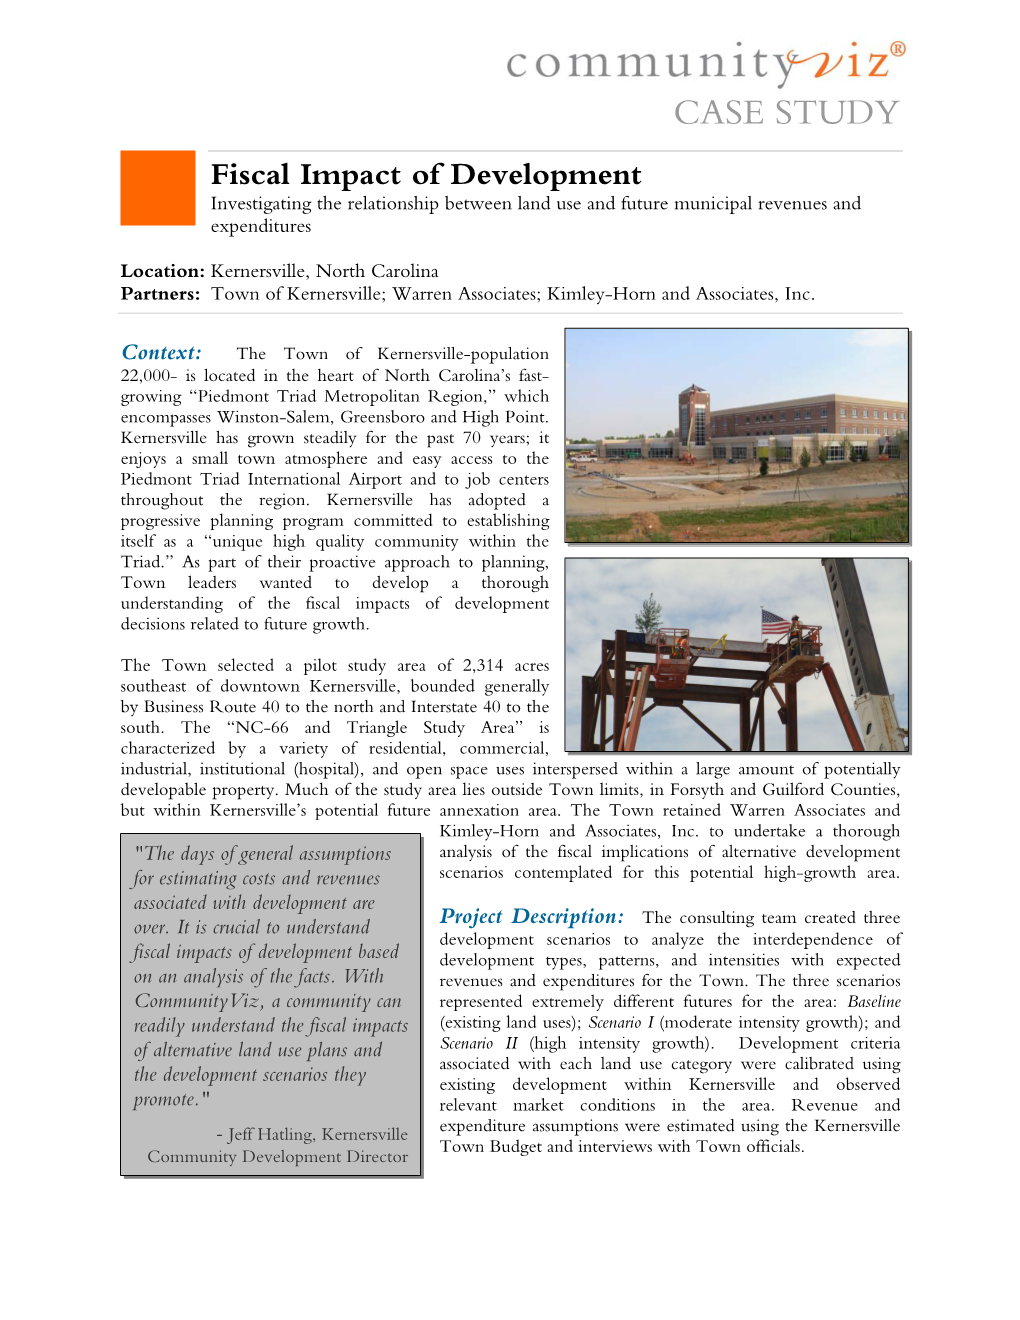 CASE STUDY Fiscal Impact of Development Investigating the Relationship Between Land Use and Future Municipal Revenues and Expenditures